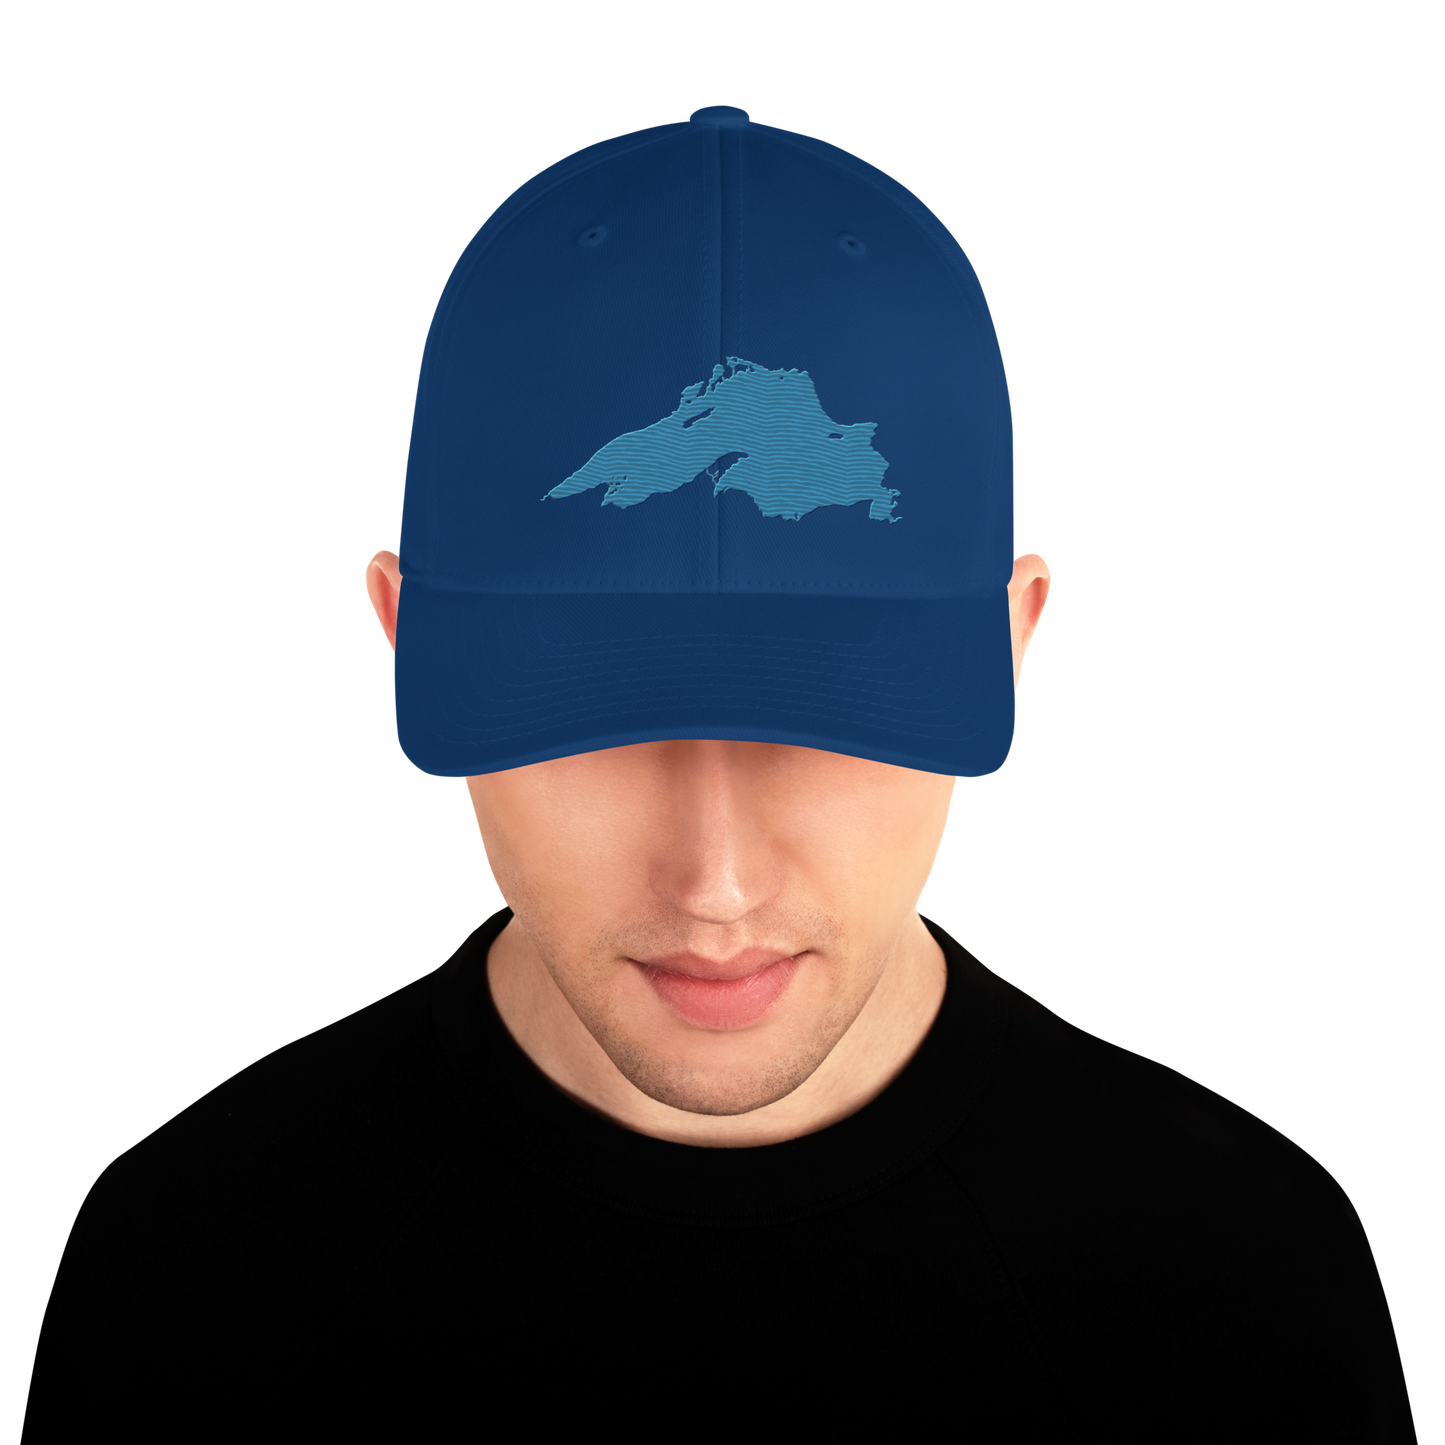 Lake Superior Fitted Baseball Cap | Traverse Blue